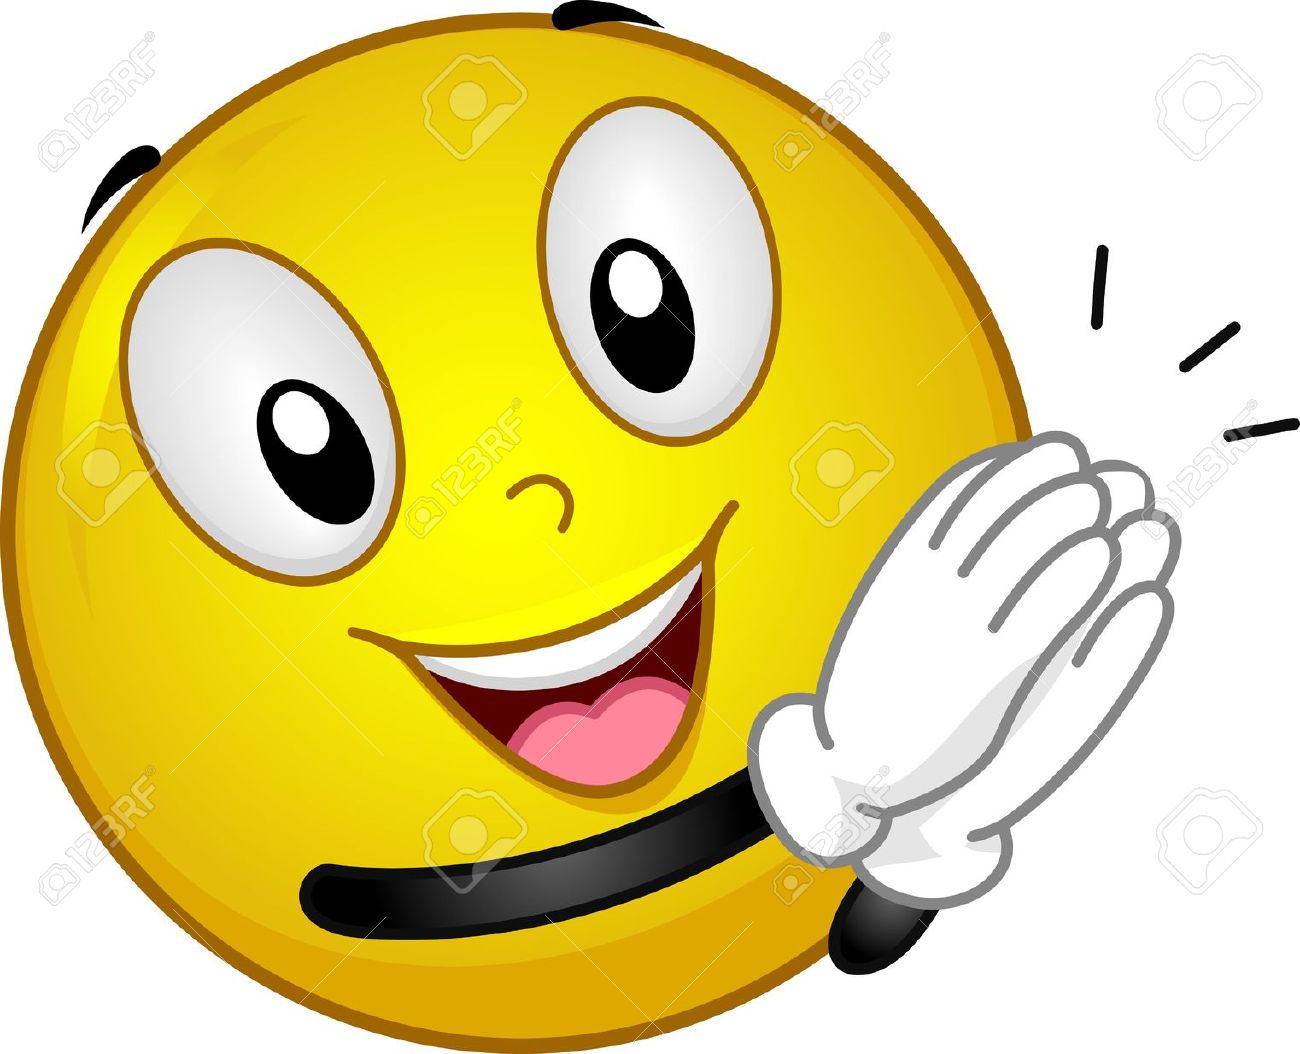 Smiley clapping hands clipart